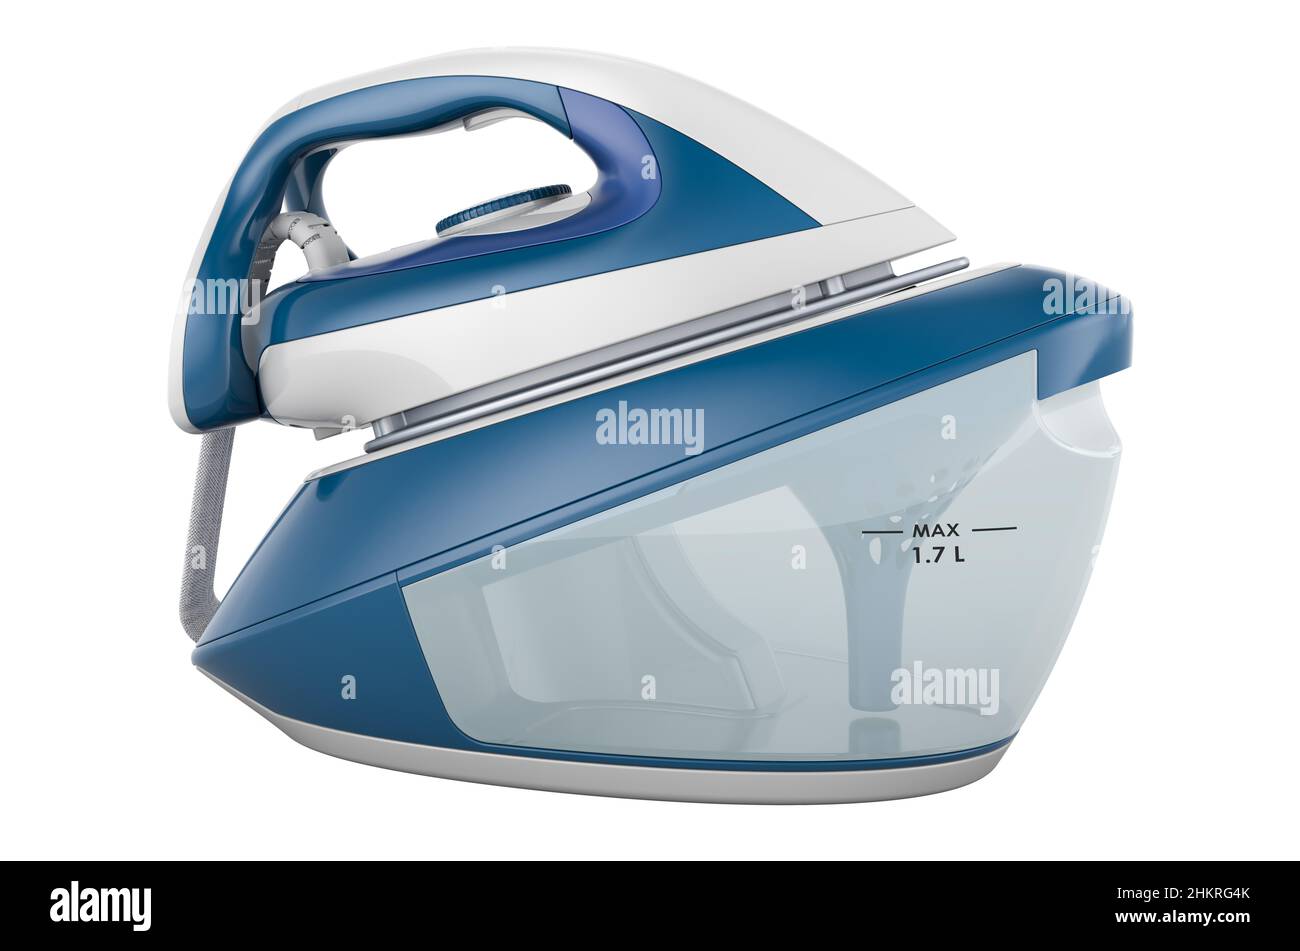 Steam Generator Iron High Resolution Stock Photography and Images - Alamy